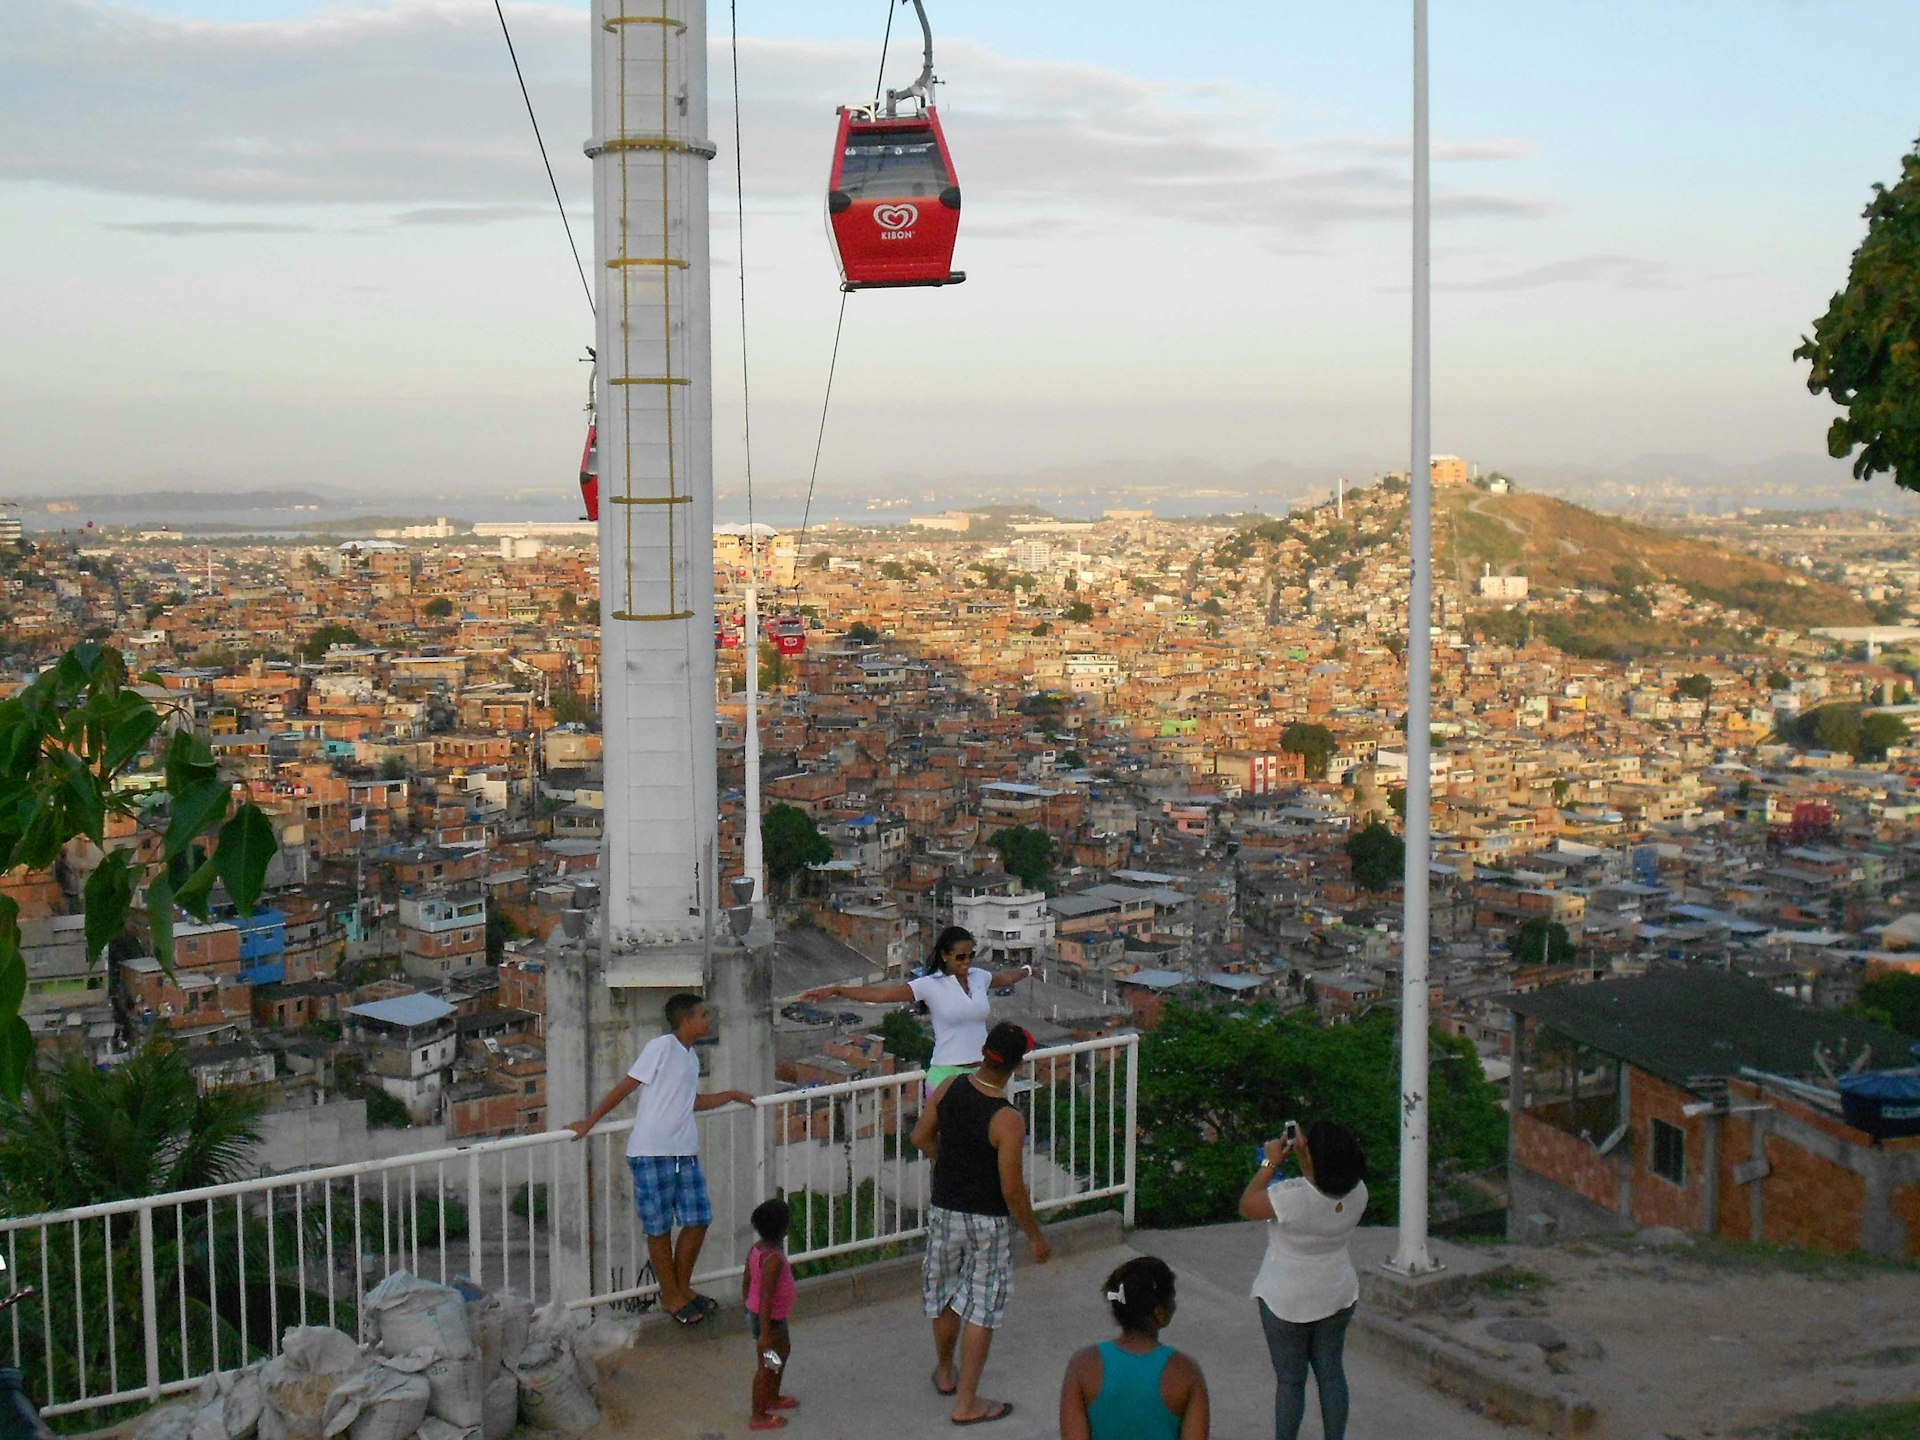 Tourists Posing in front of the Cable Car of Complexo Alemao, Rio De Janeiro